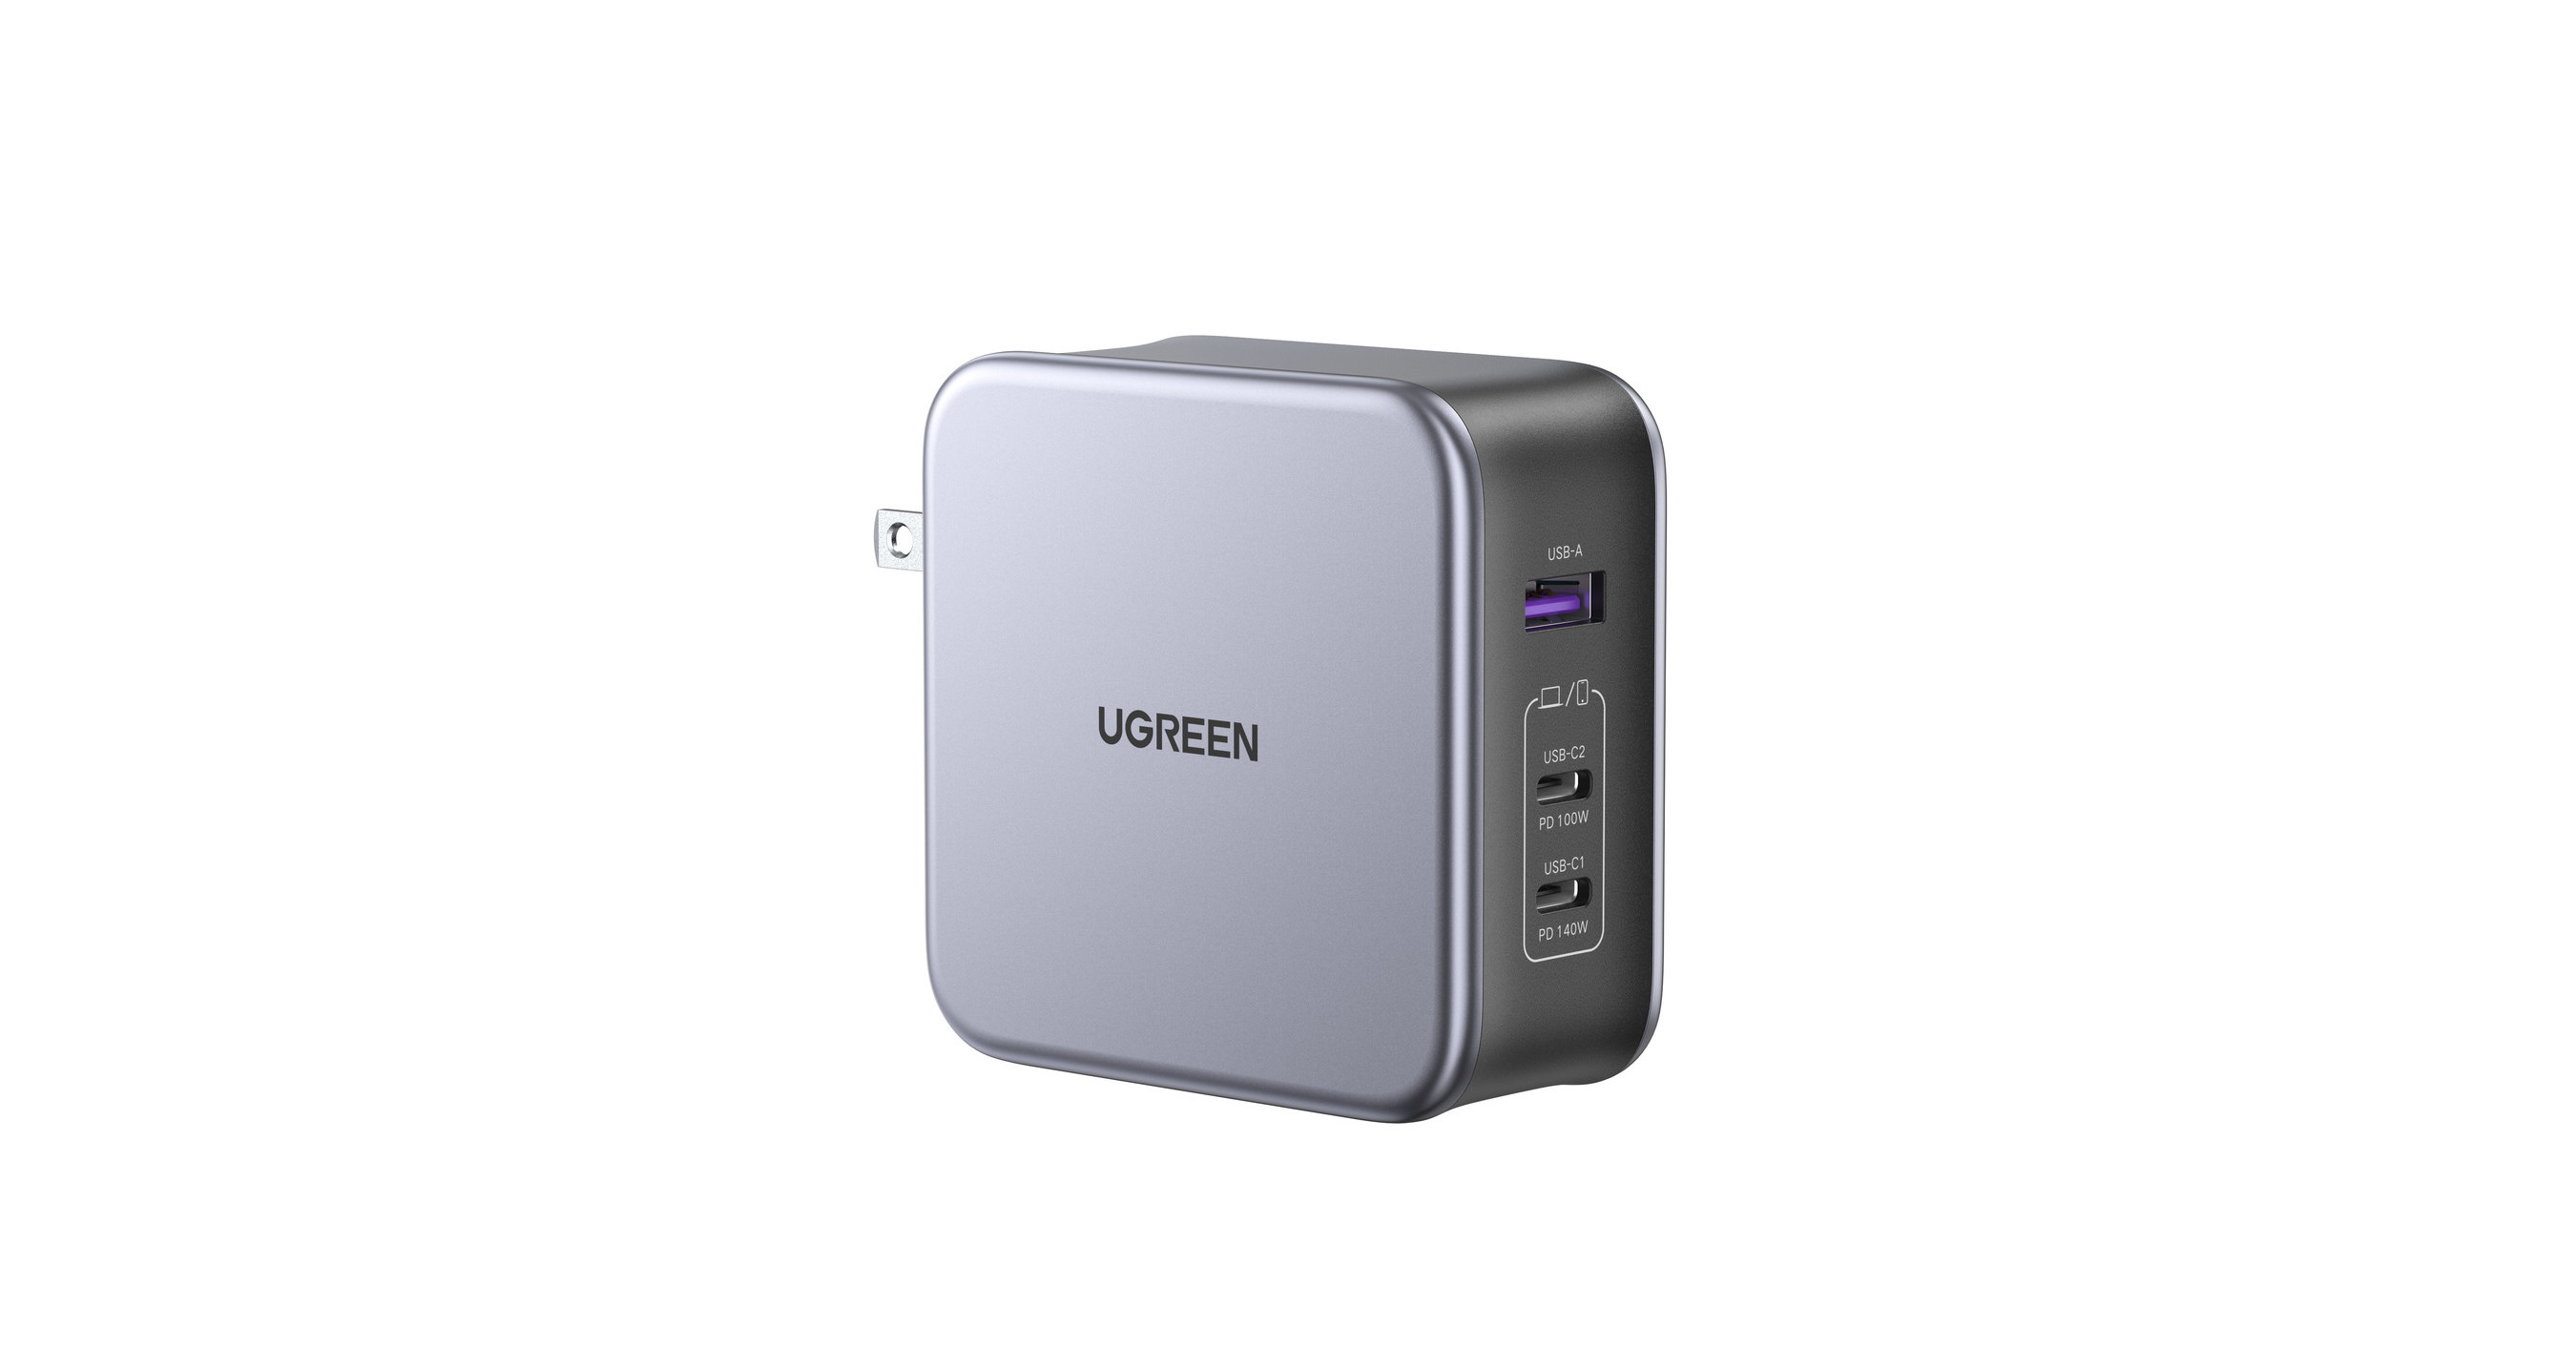 Ugreen announces a faster and safer charger for any charging